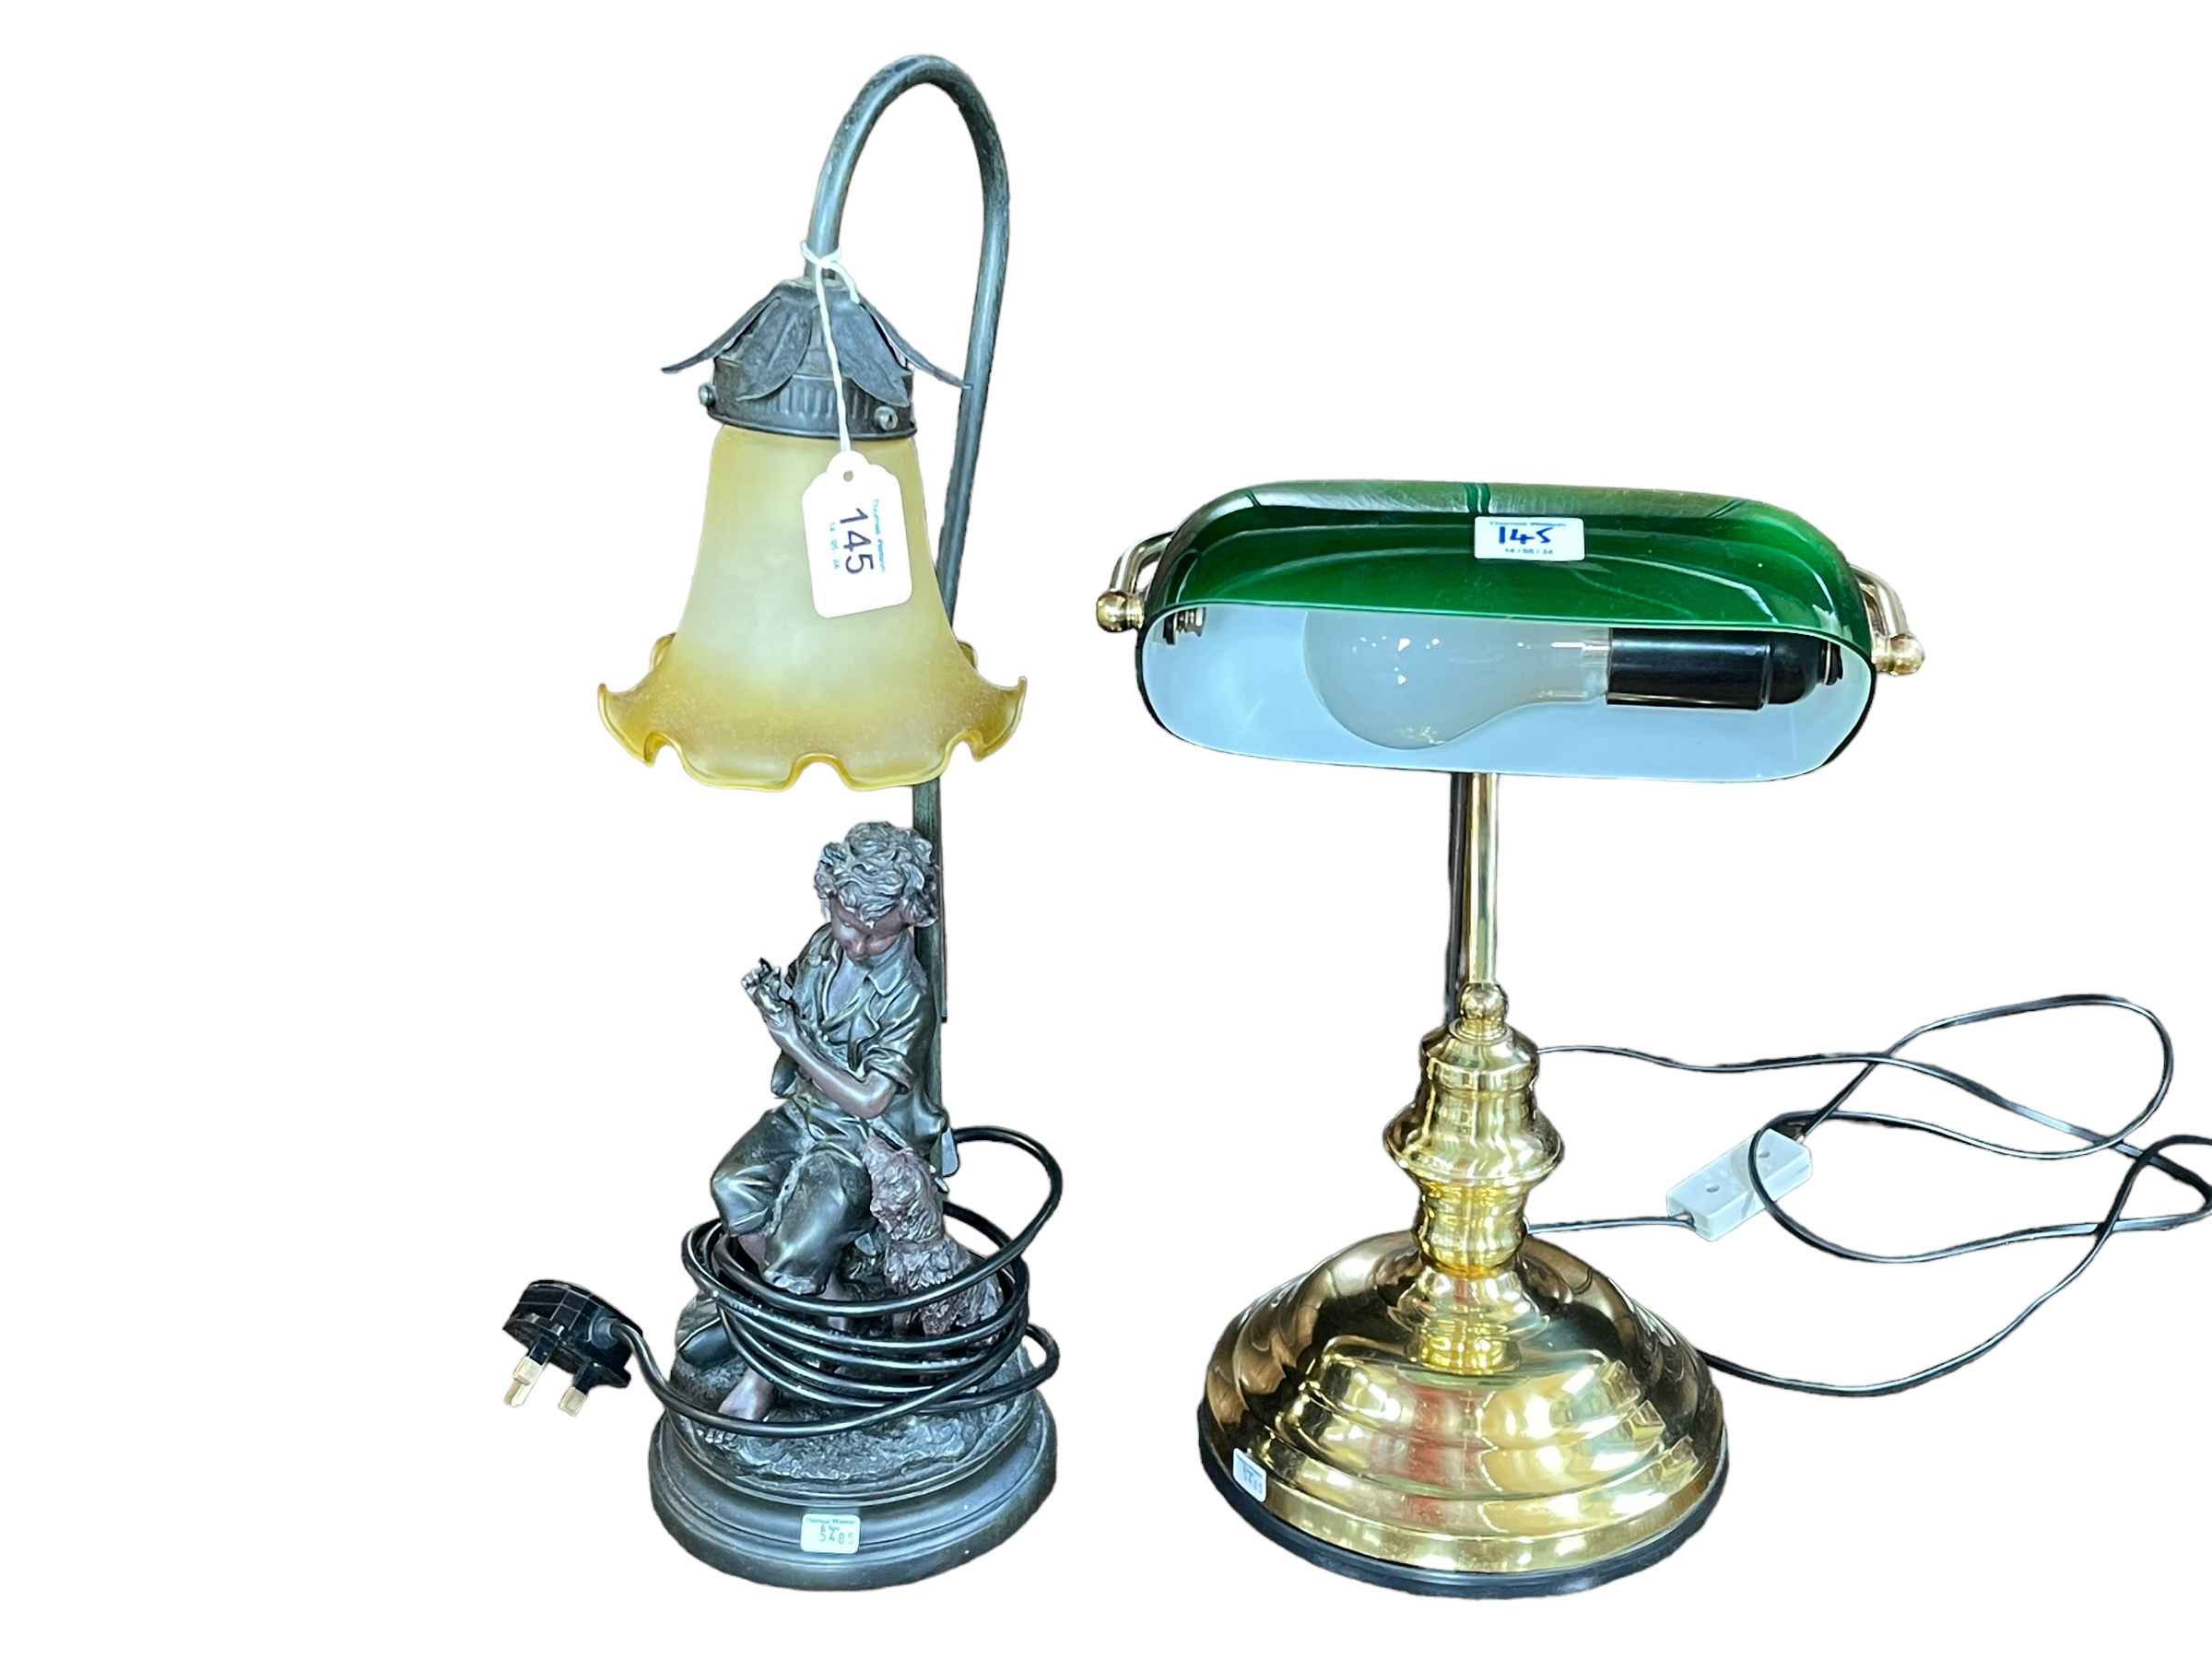 Brass desk lamp with green shade and a figural lamp with shade.